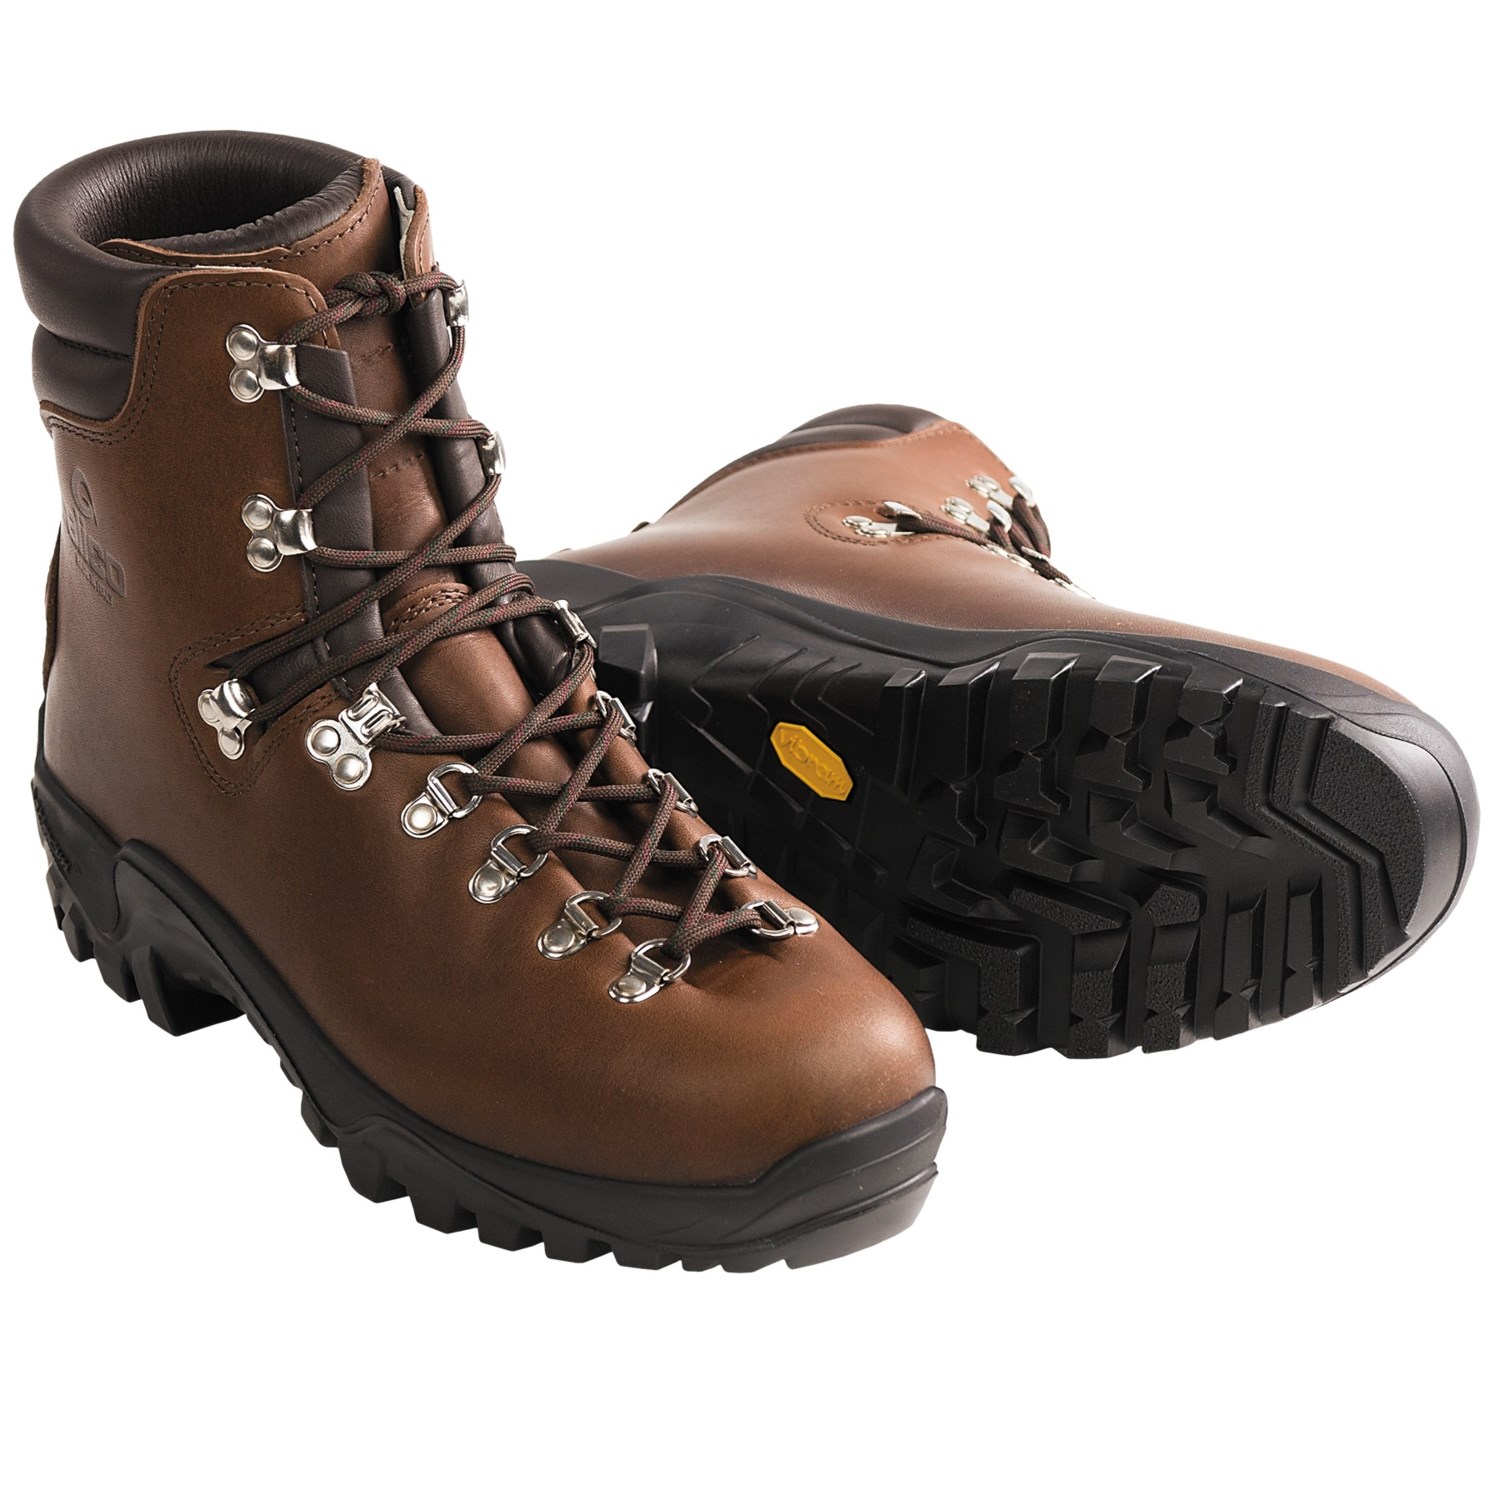 Alico Wind River Hiking Boots (For Men) - Save 68%